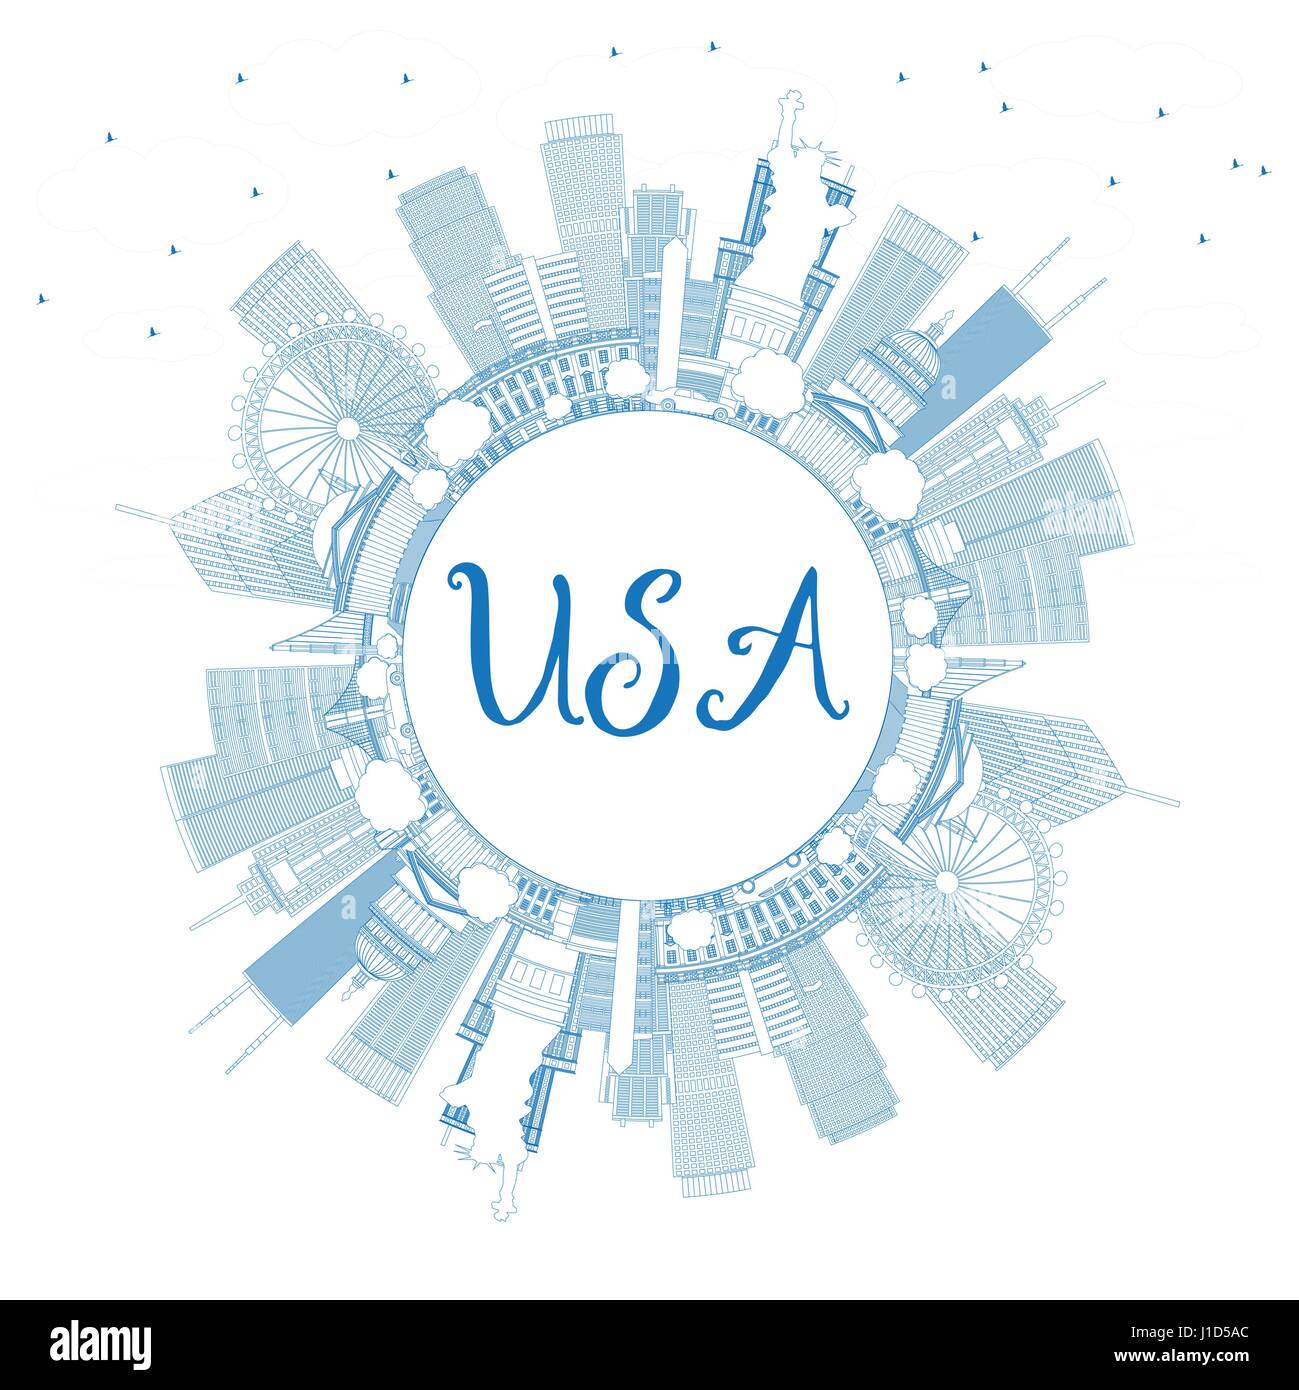 Outline USA Skyline with Blue Skyscrapers, Landmarks and Copy Space. Vector Illustration. Business Travel and Tourism Concept with Modern Architecture Stock Vector